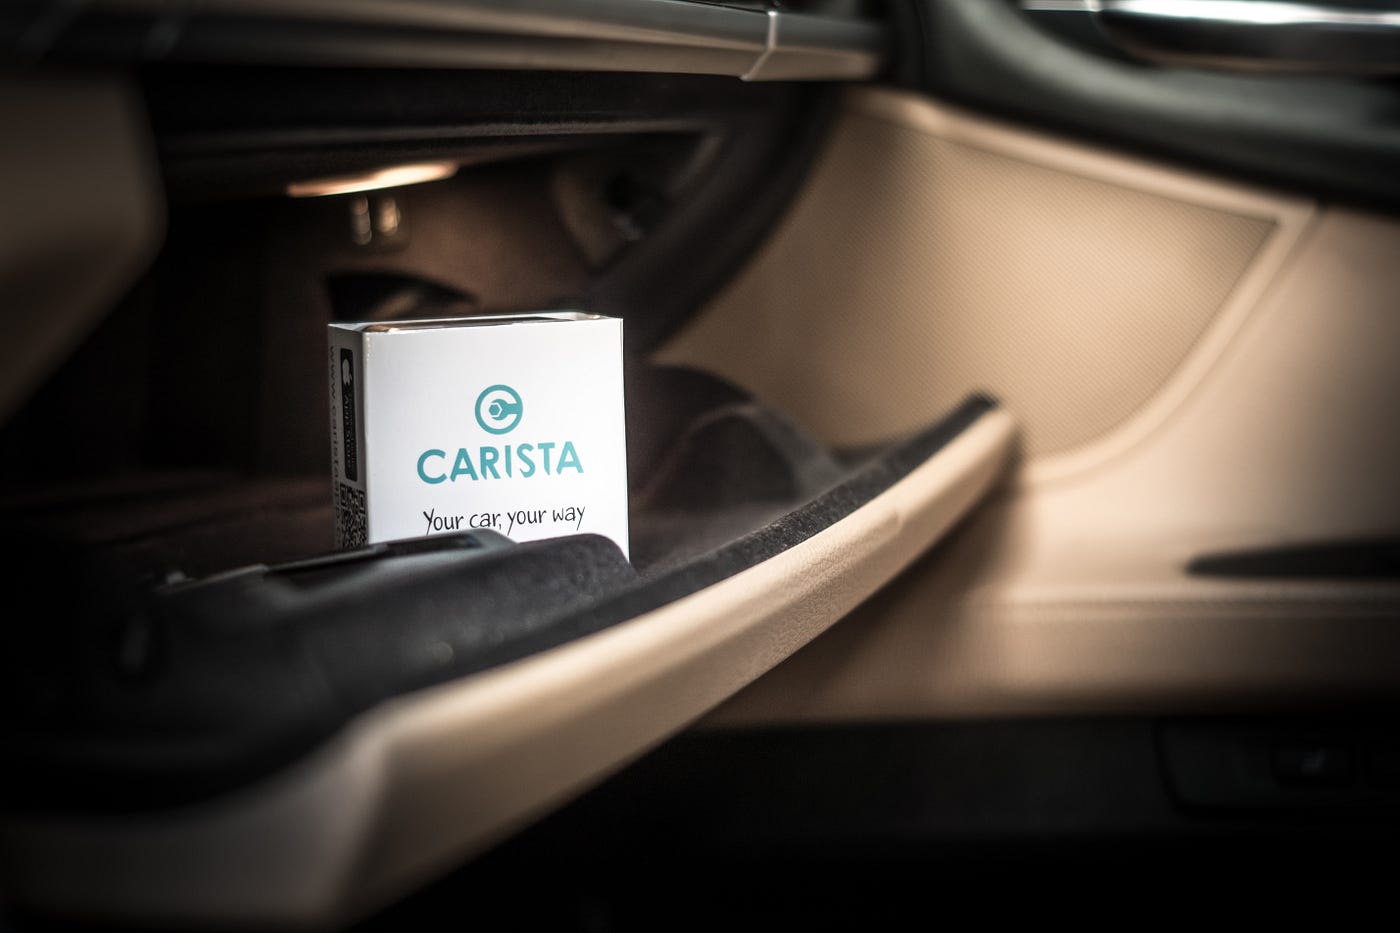 ECS News - Carista OBDII Dongle For Your European Vehicle